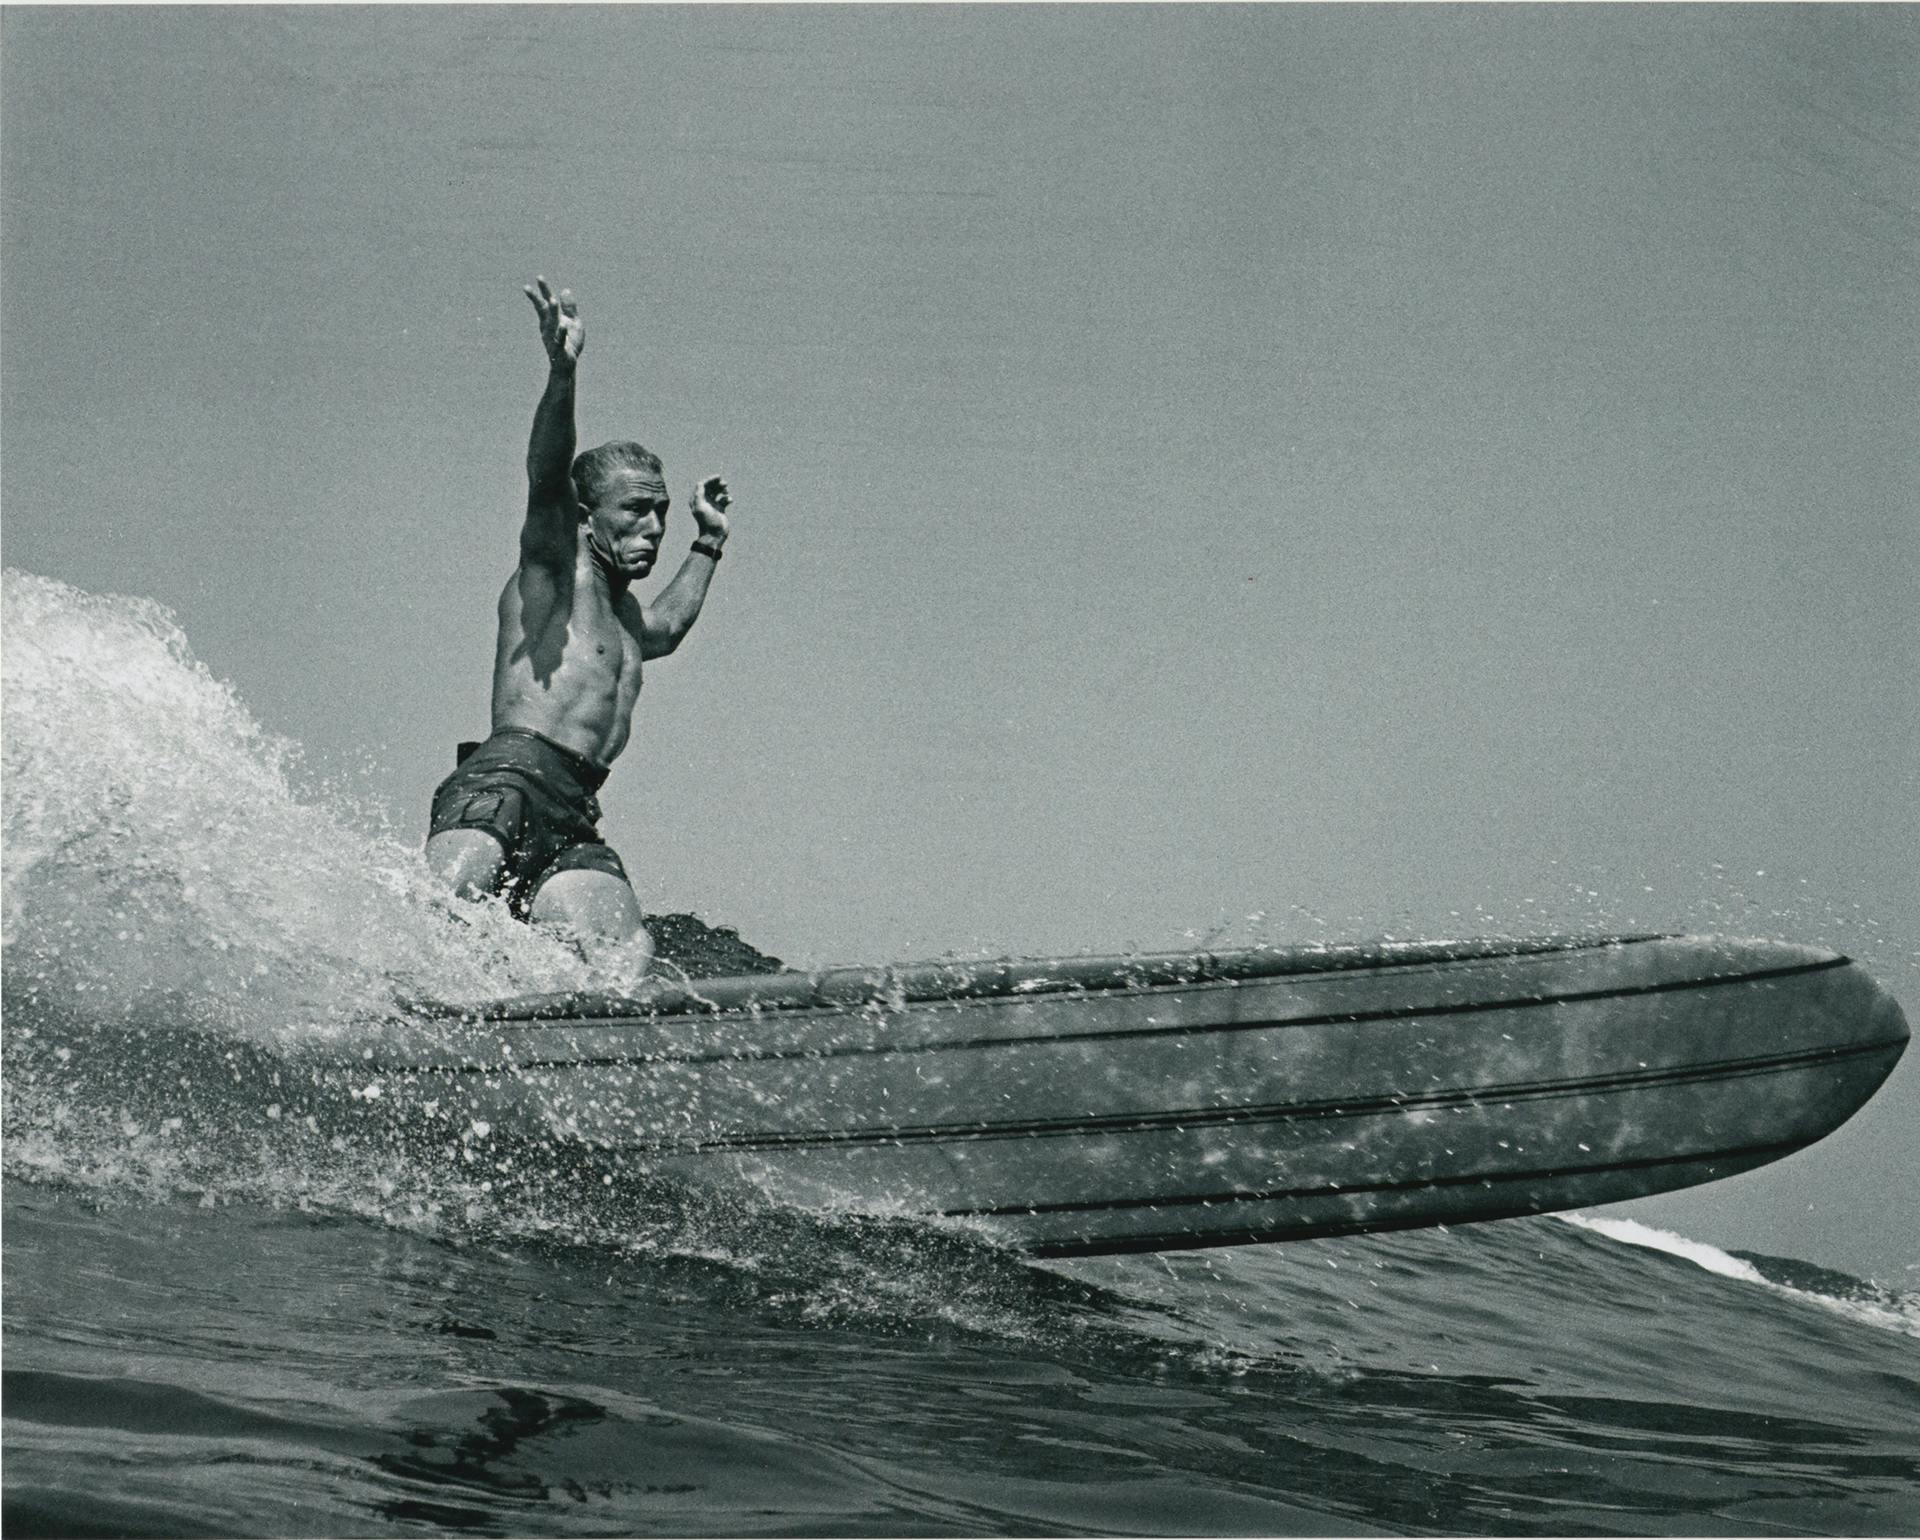 <p>Dewey was one of the first to add an element of flair and creativity to riding a surfboard.</p>
